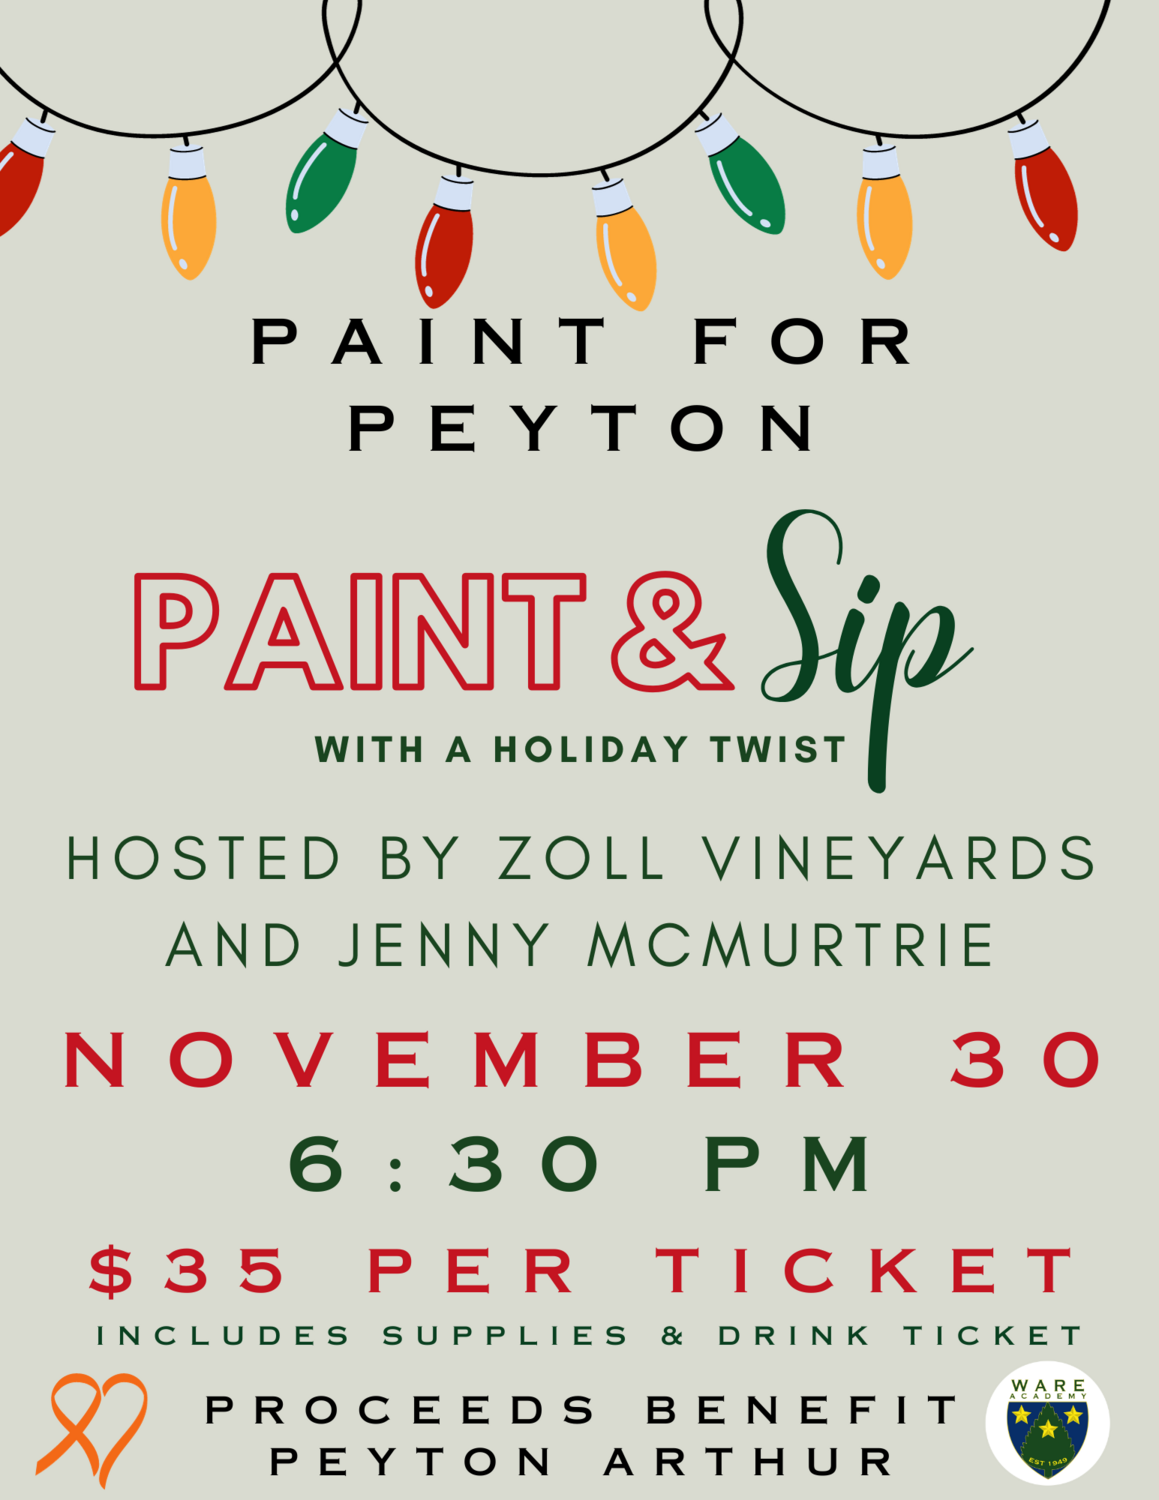 Paint for Peyton